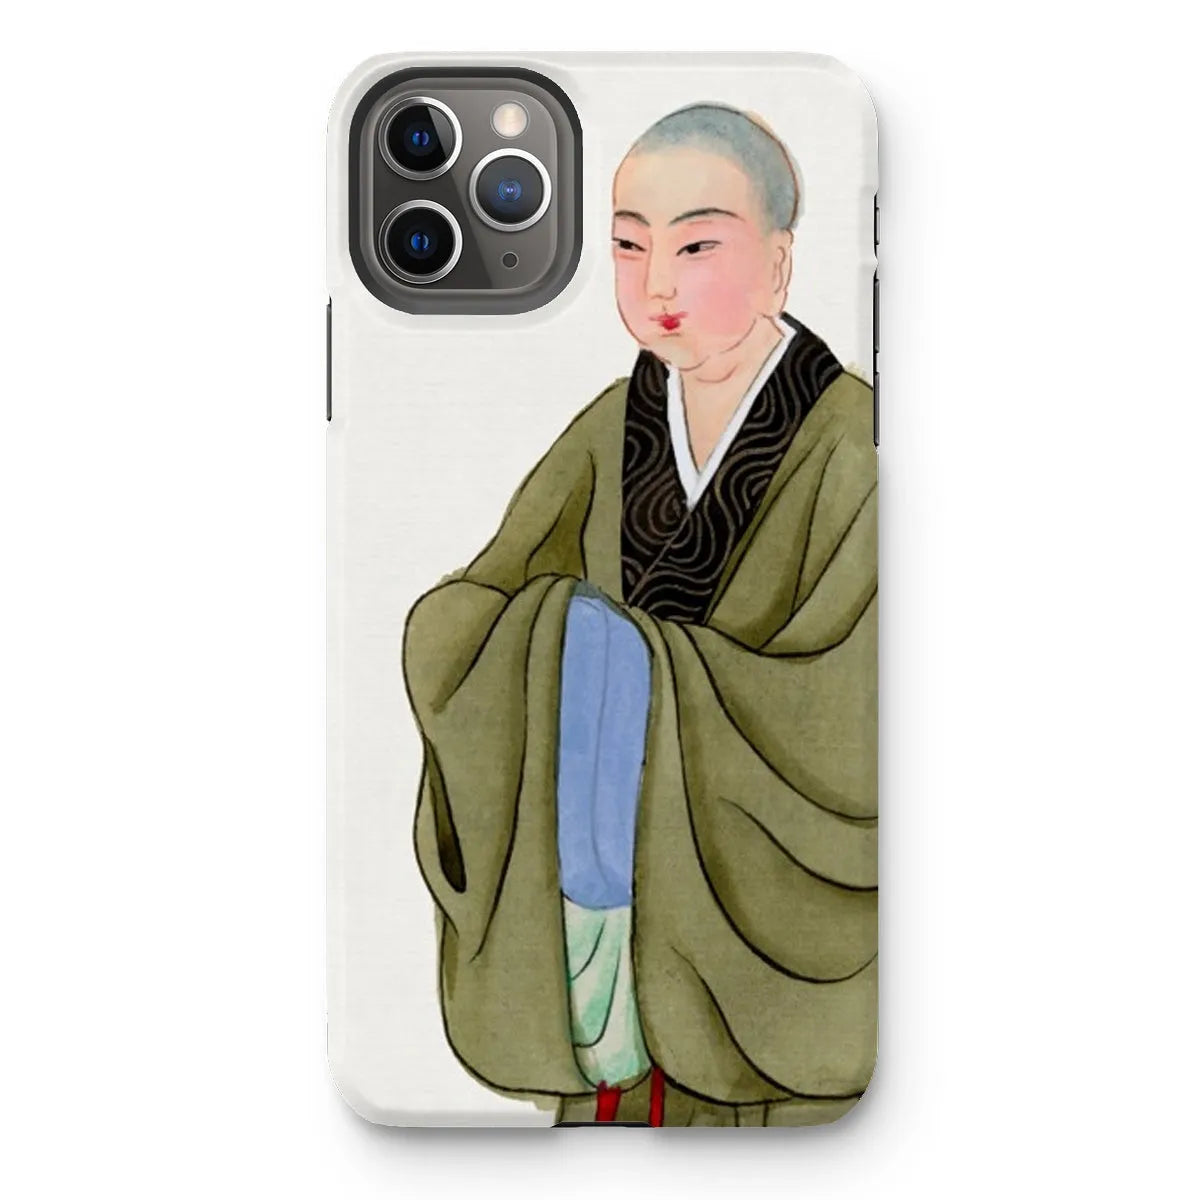 Buddhist Monk - Manchu Chinese Aesthetic Art Phone Case - Iphone 11 Pro Max / Matte - Mobile Phone Cases - Aesthetic Art